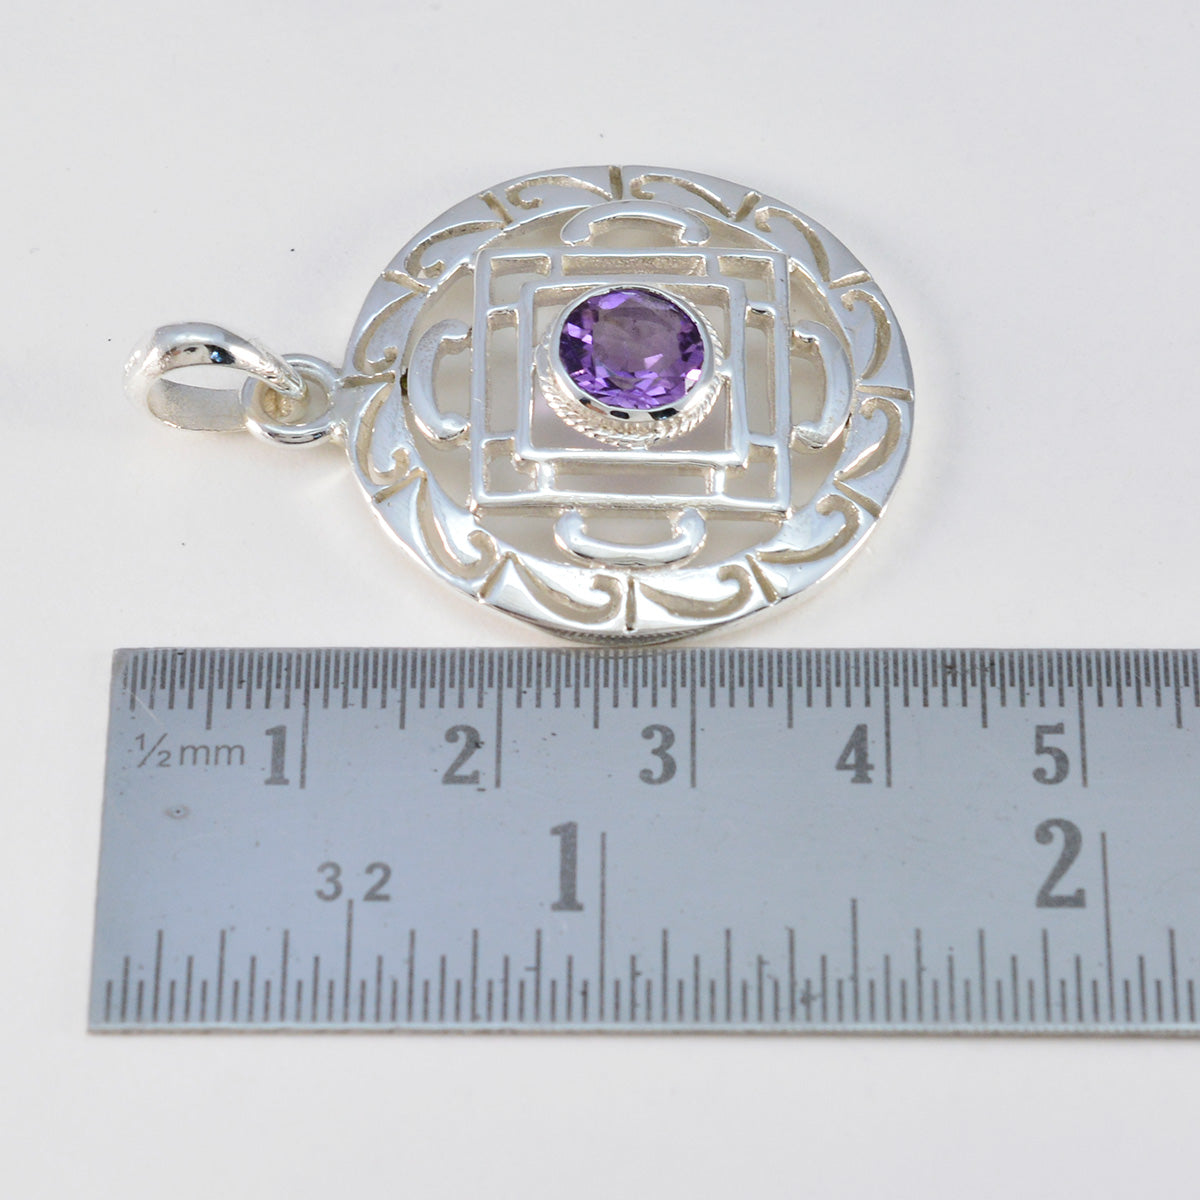 Riyo Hot Gemstone Round Faceted Purple Amethyst 1003 Sterling Silver Pendant Gift For Teachers Day